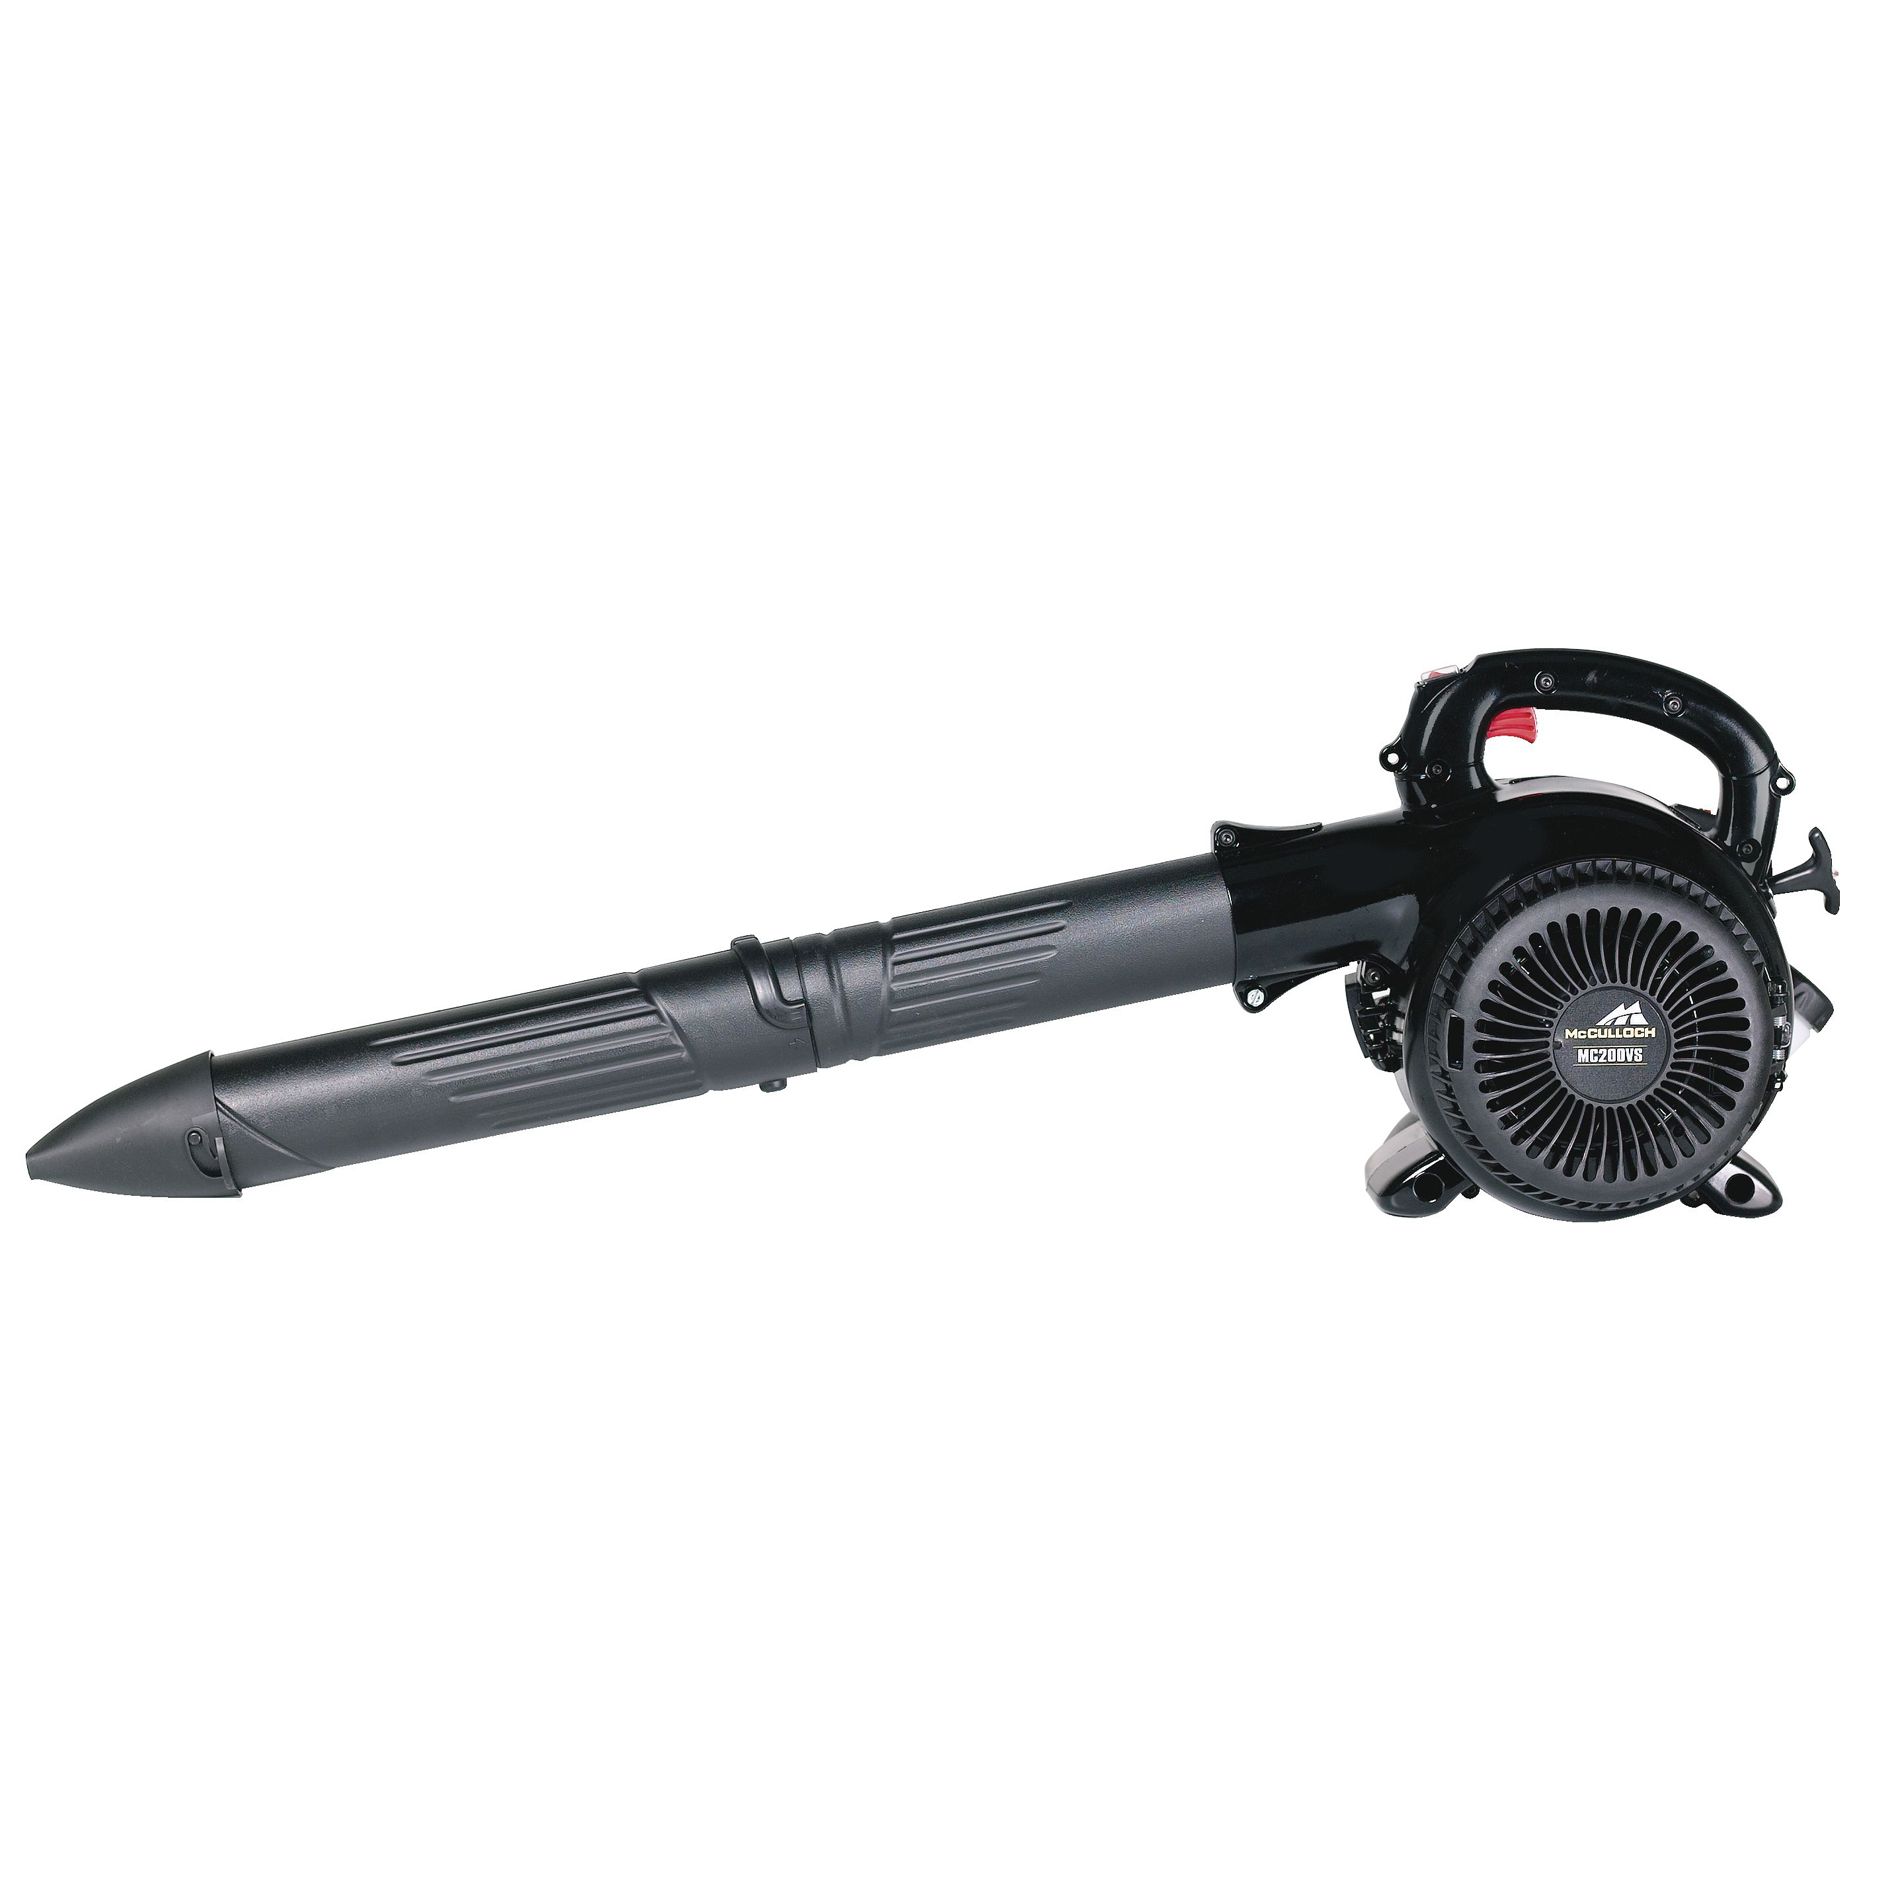 McCulloch 966625101 25cc 2-Cycle Blower